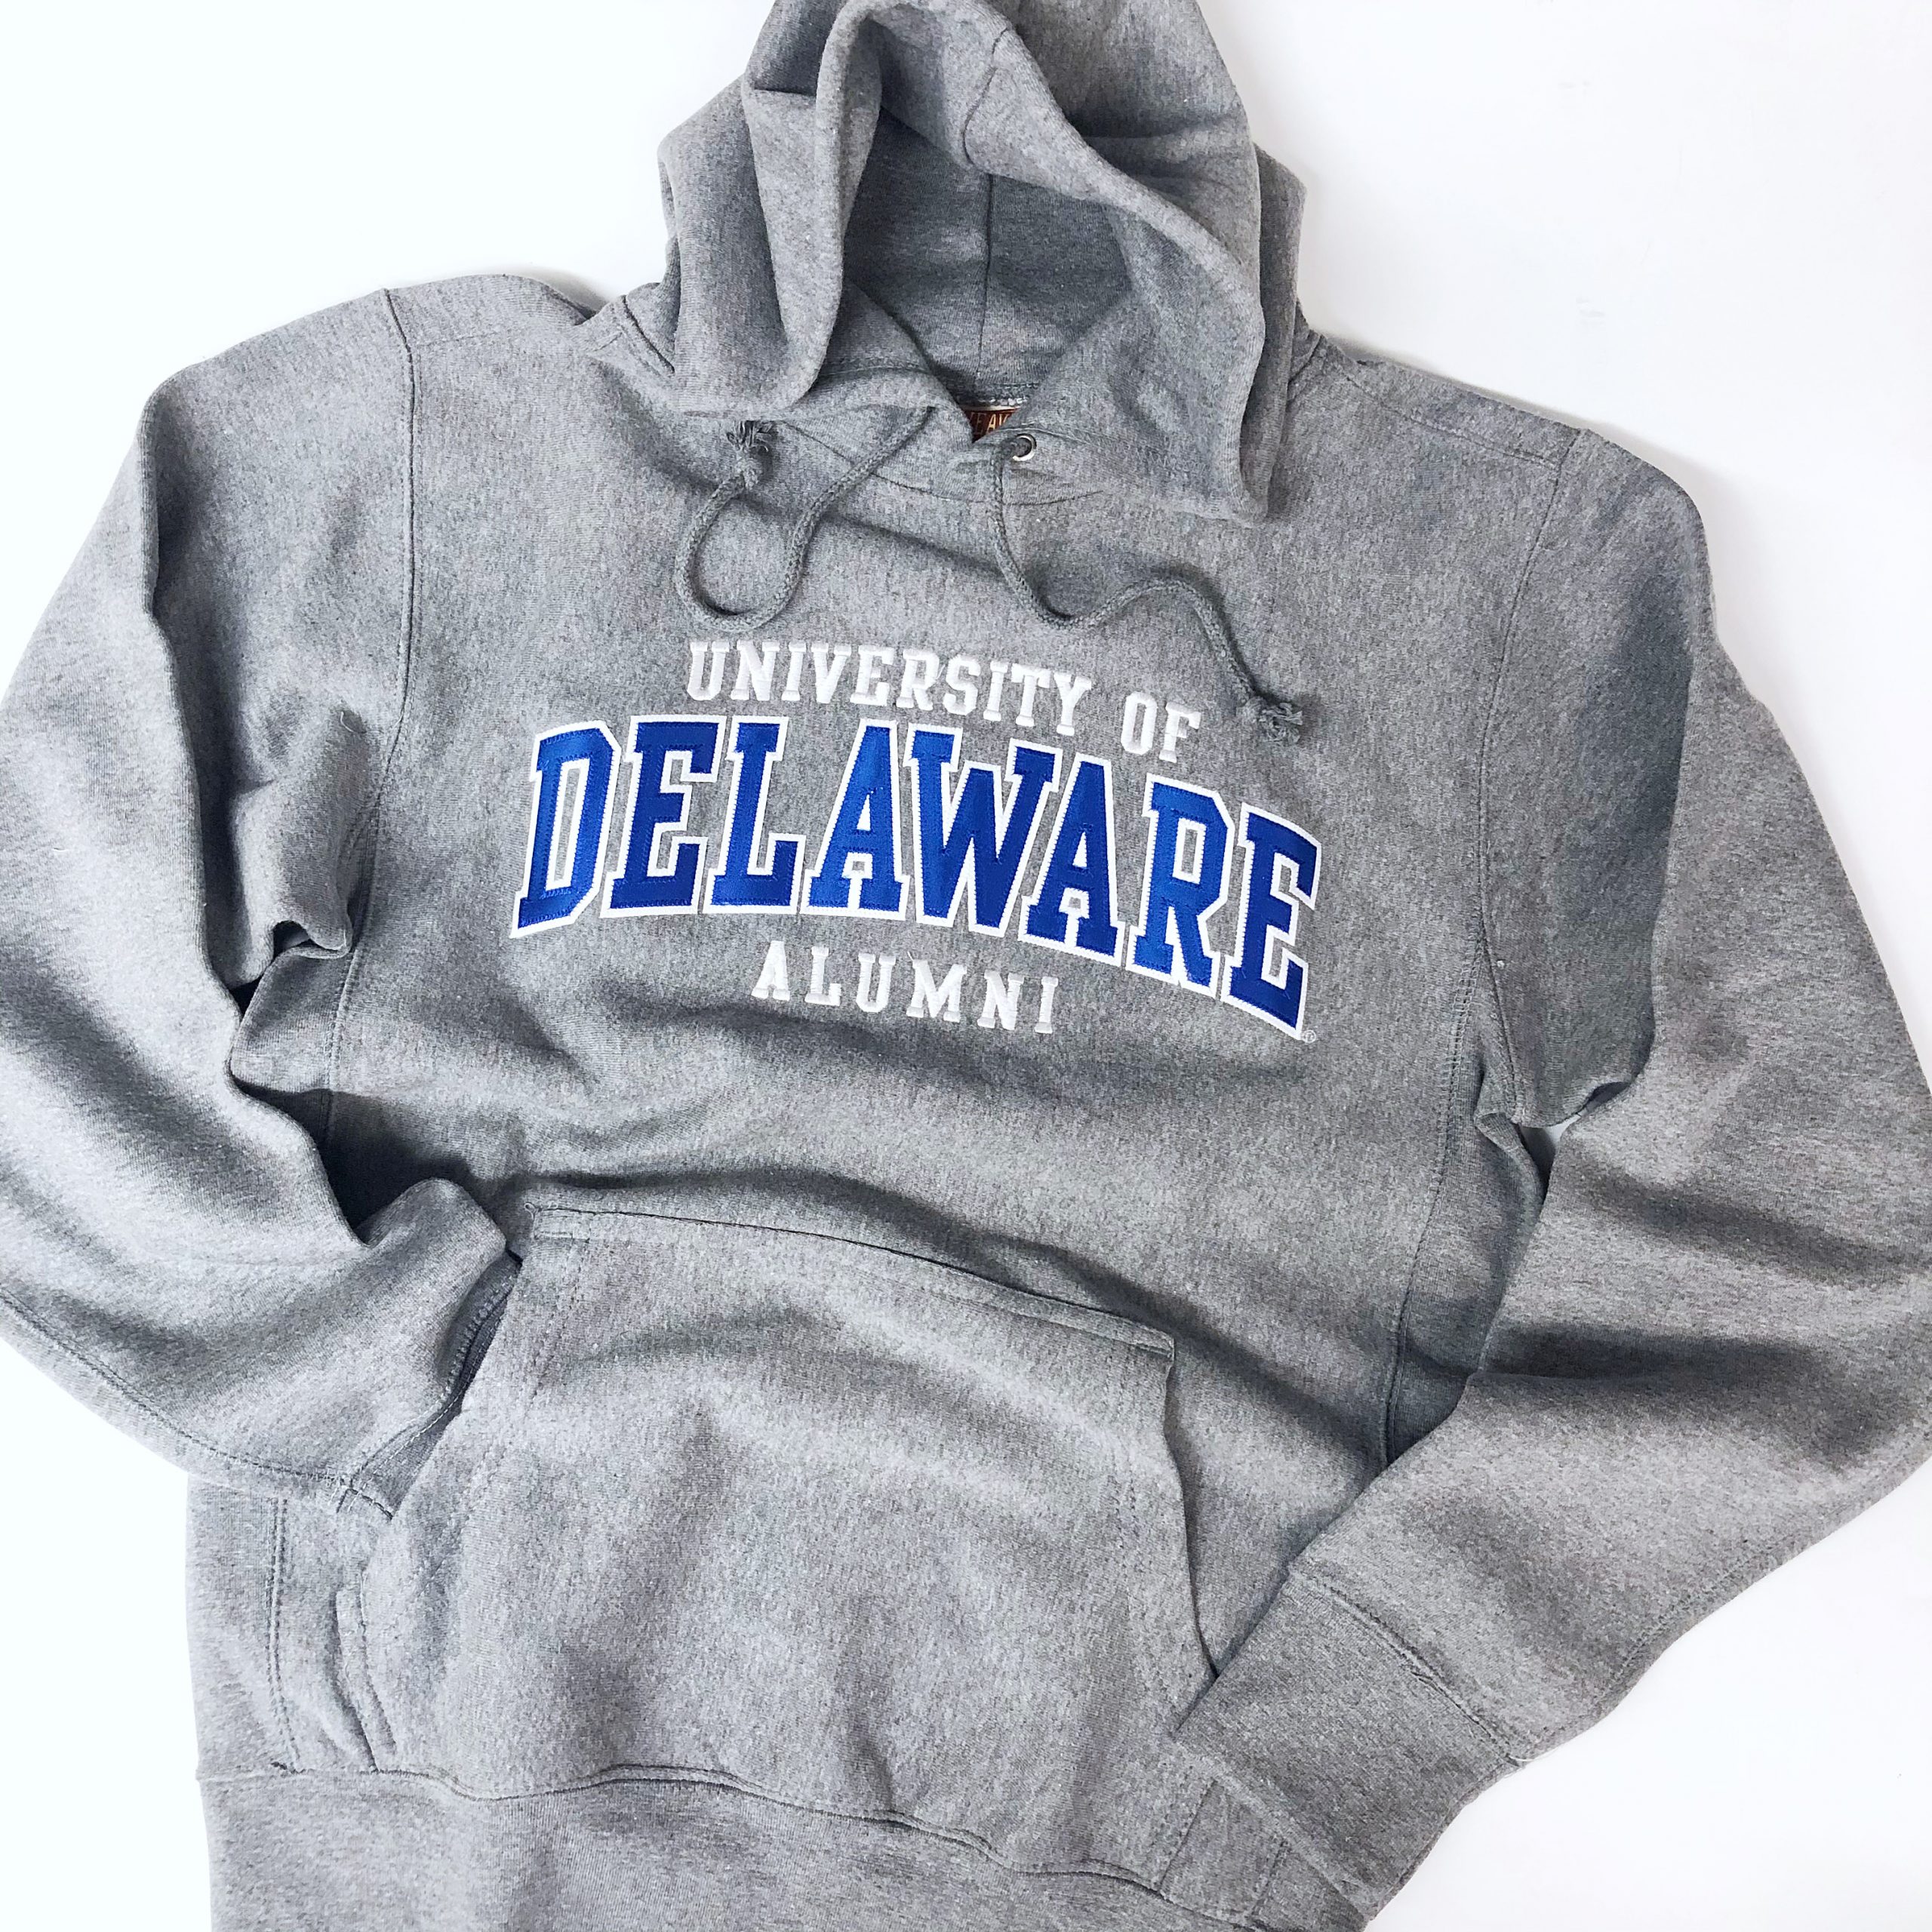 https://www.national5and10.com/wp-content/uploads/2017/05/University-of-Delaware-MV-Embroidered-Tackle-Twill-Alumni-Hoodie-1-scaled.jpg